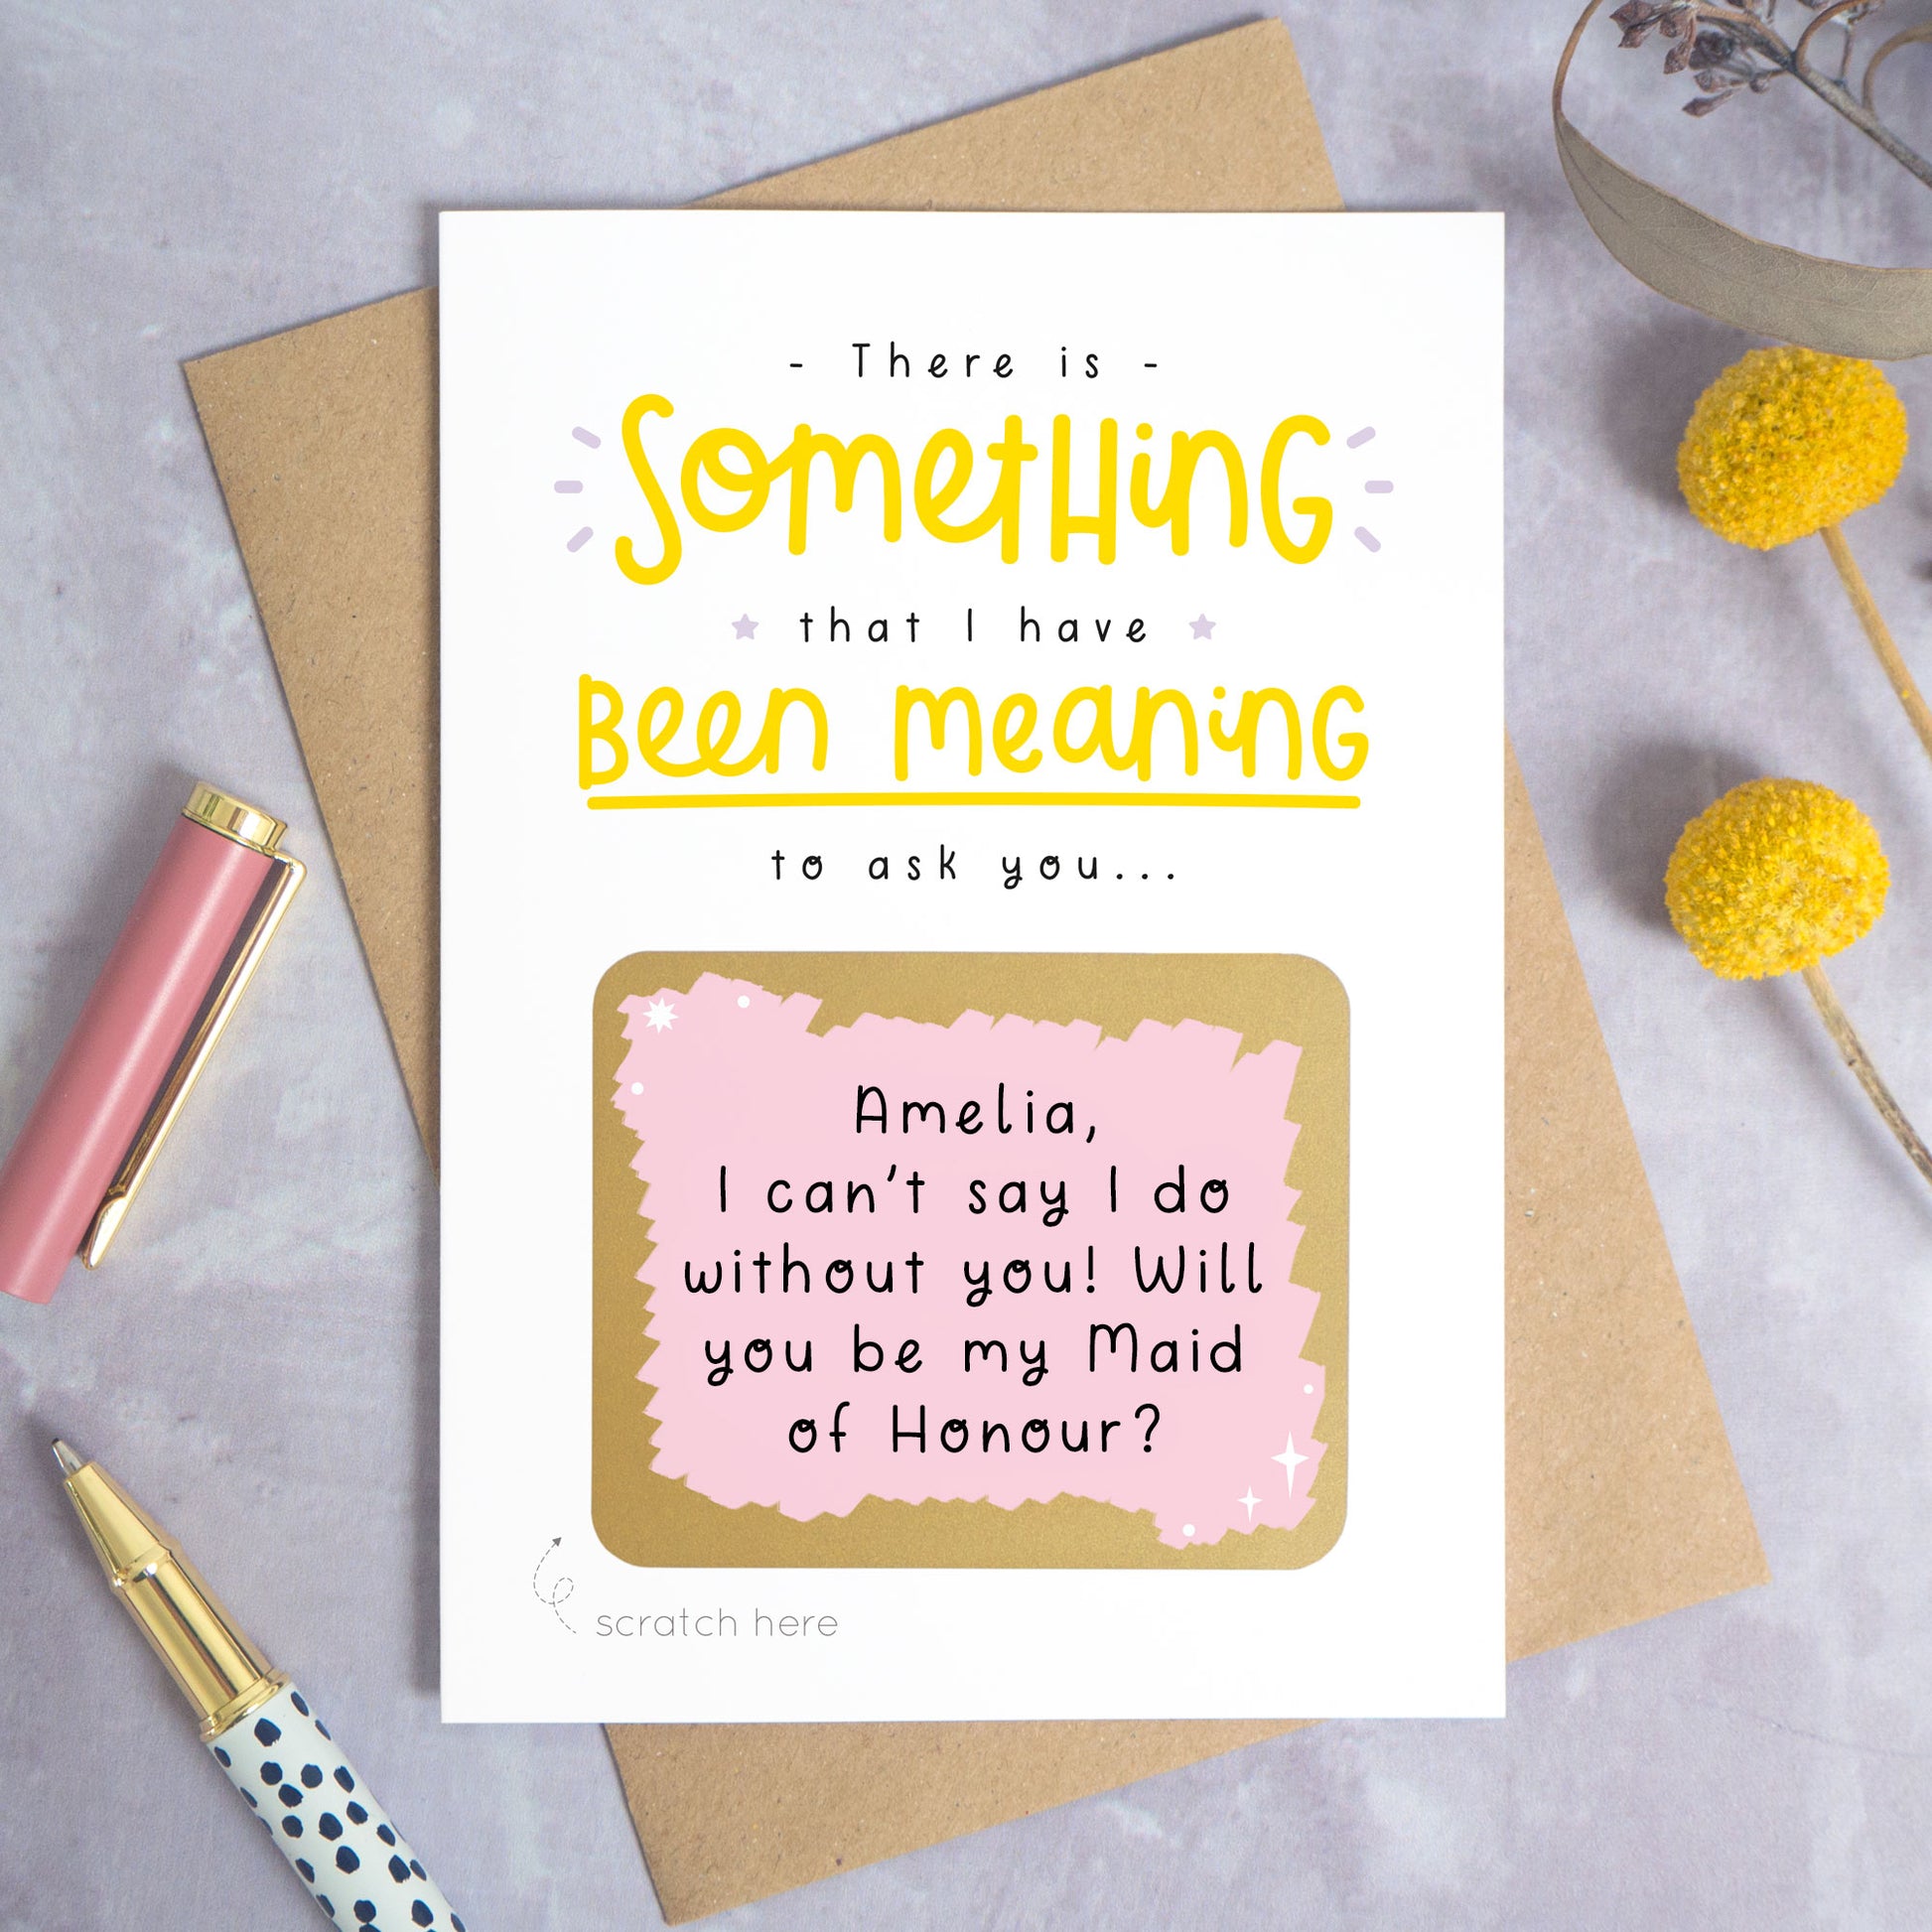 A personalised custom question scratch card photographed on a grey background with yellow flowers and a pink pen lid and spotty pen. The card is lying on a kraft brown envelope and the scratch box has been scratched off to reveal the personalised message. This is the yellow and pink colour way.